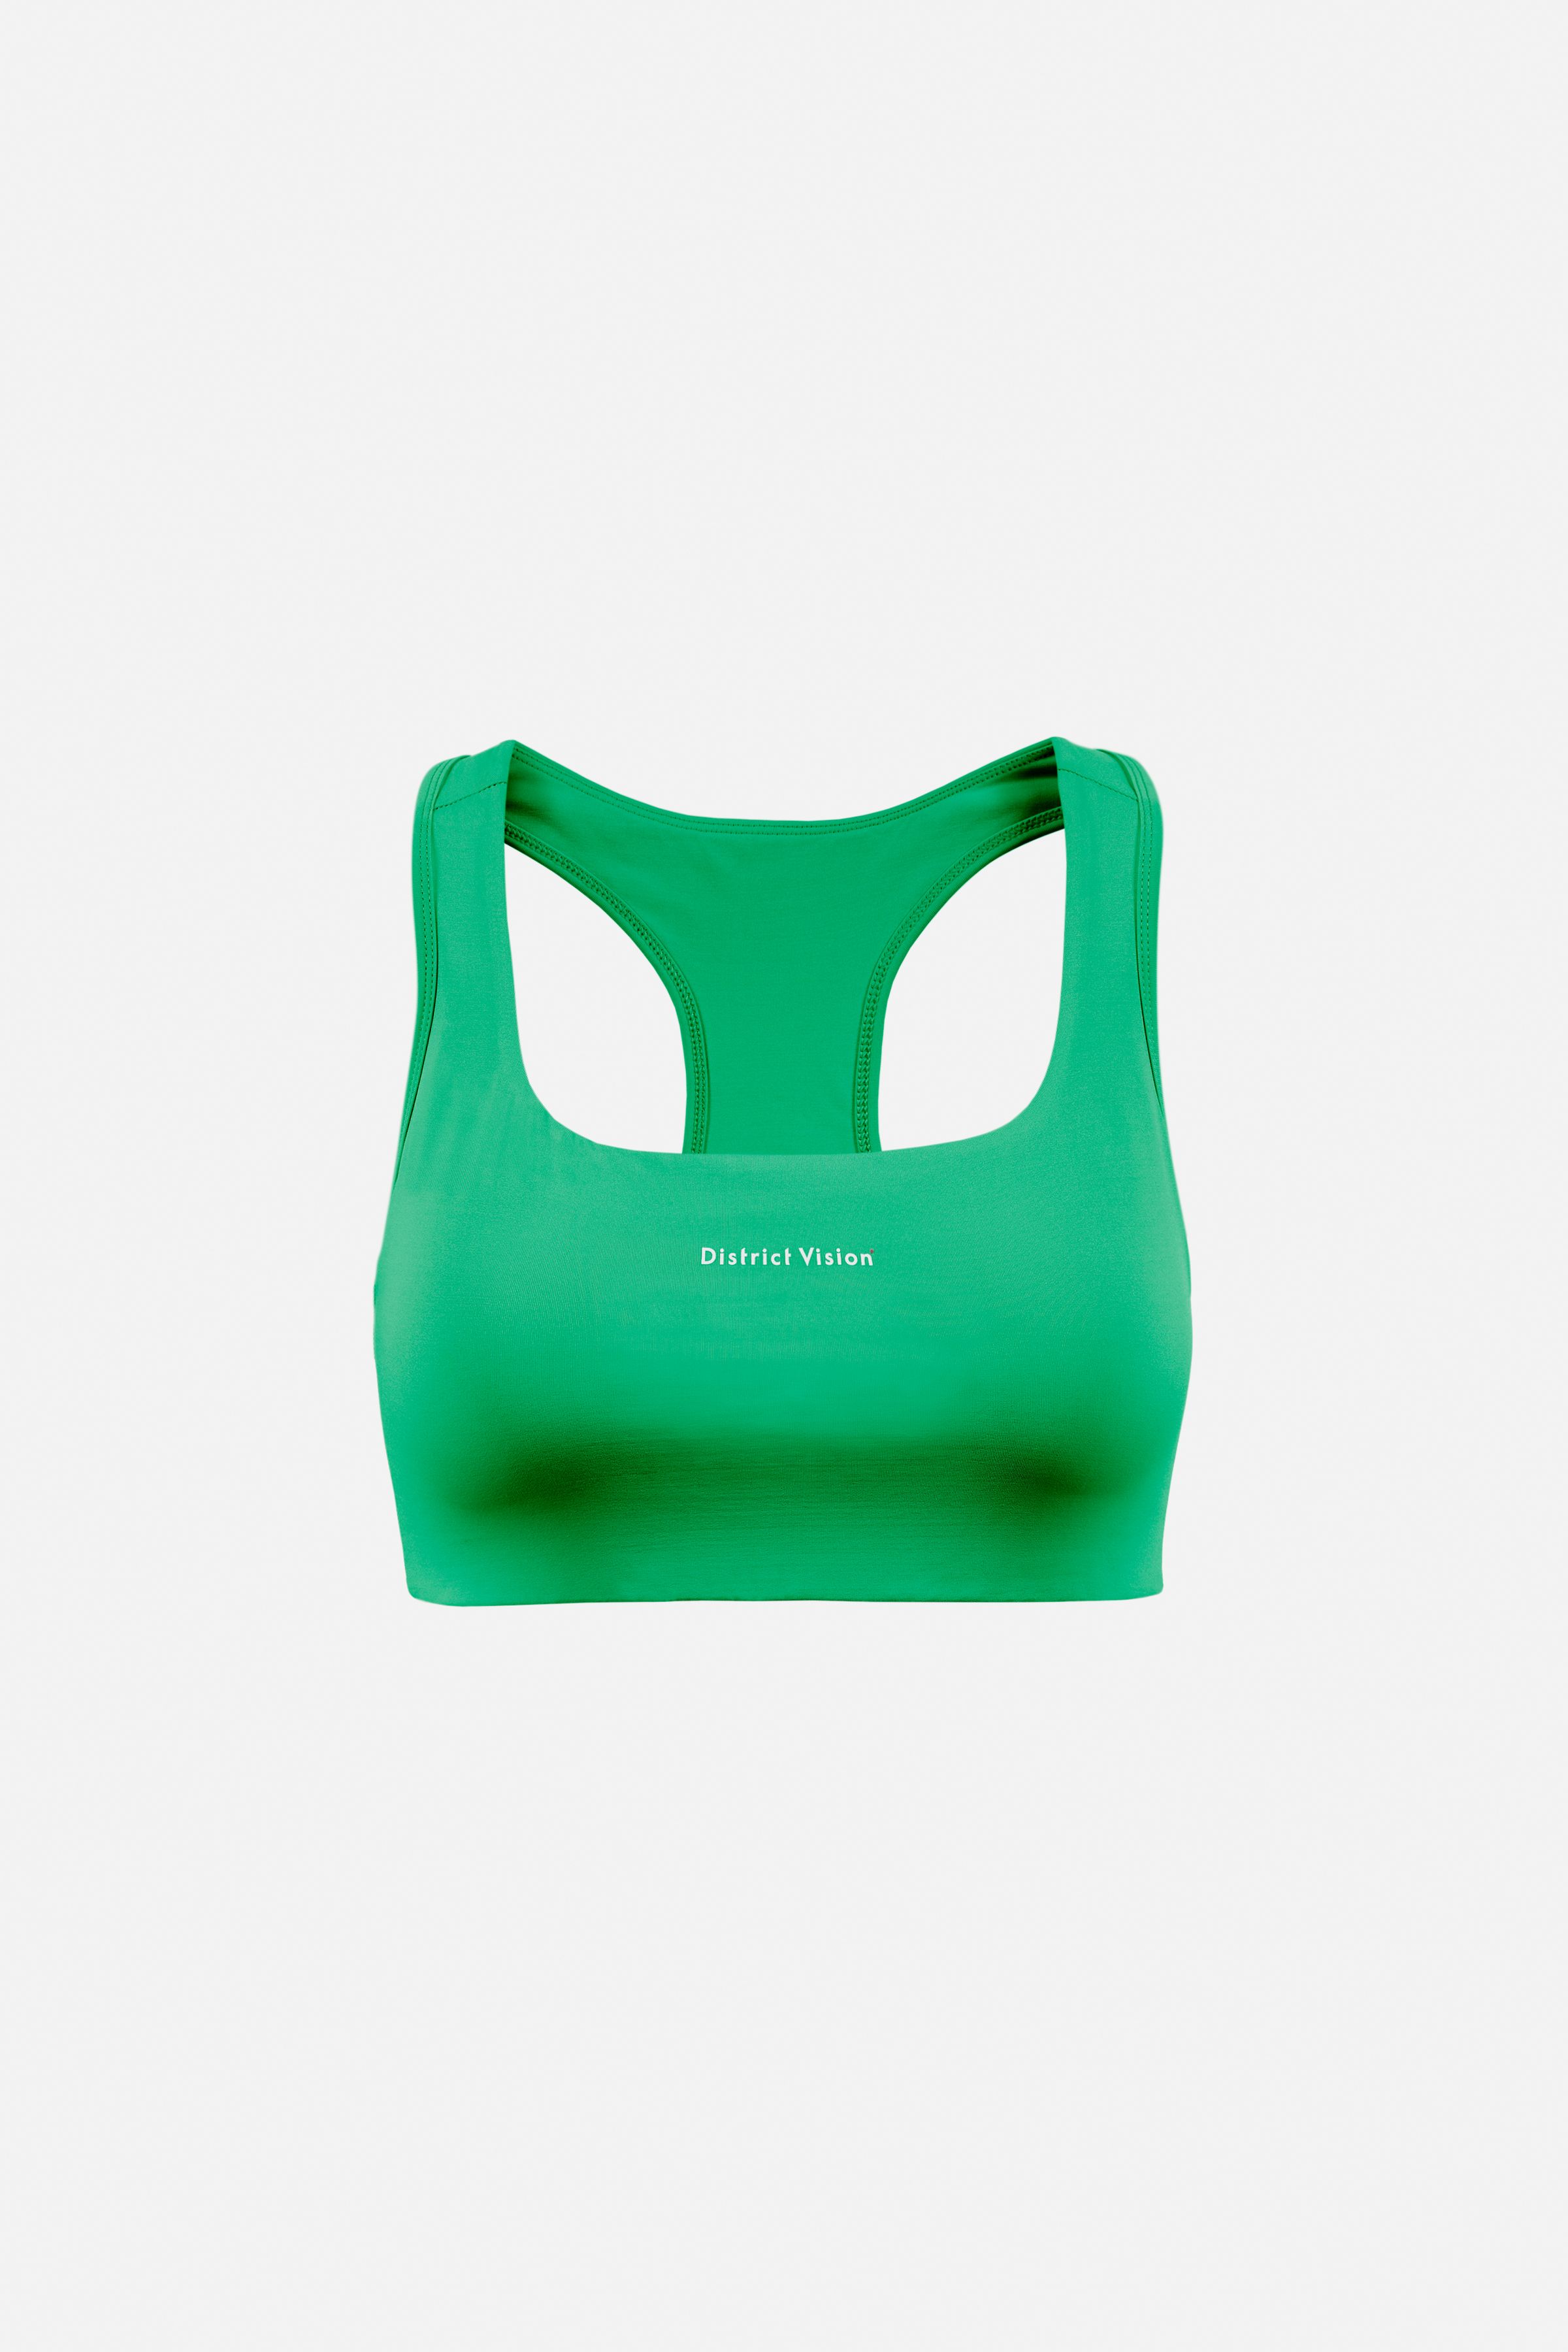 bcg Green Medium Support Sports Bra - $8 (55% Off Retail) - From Elle